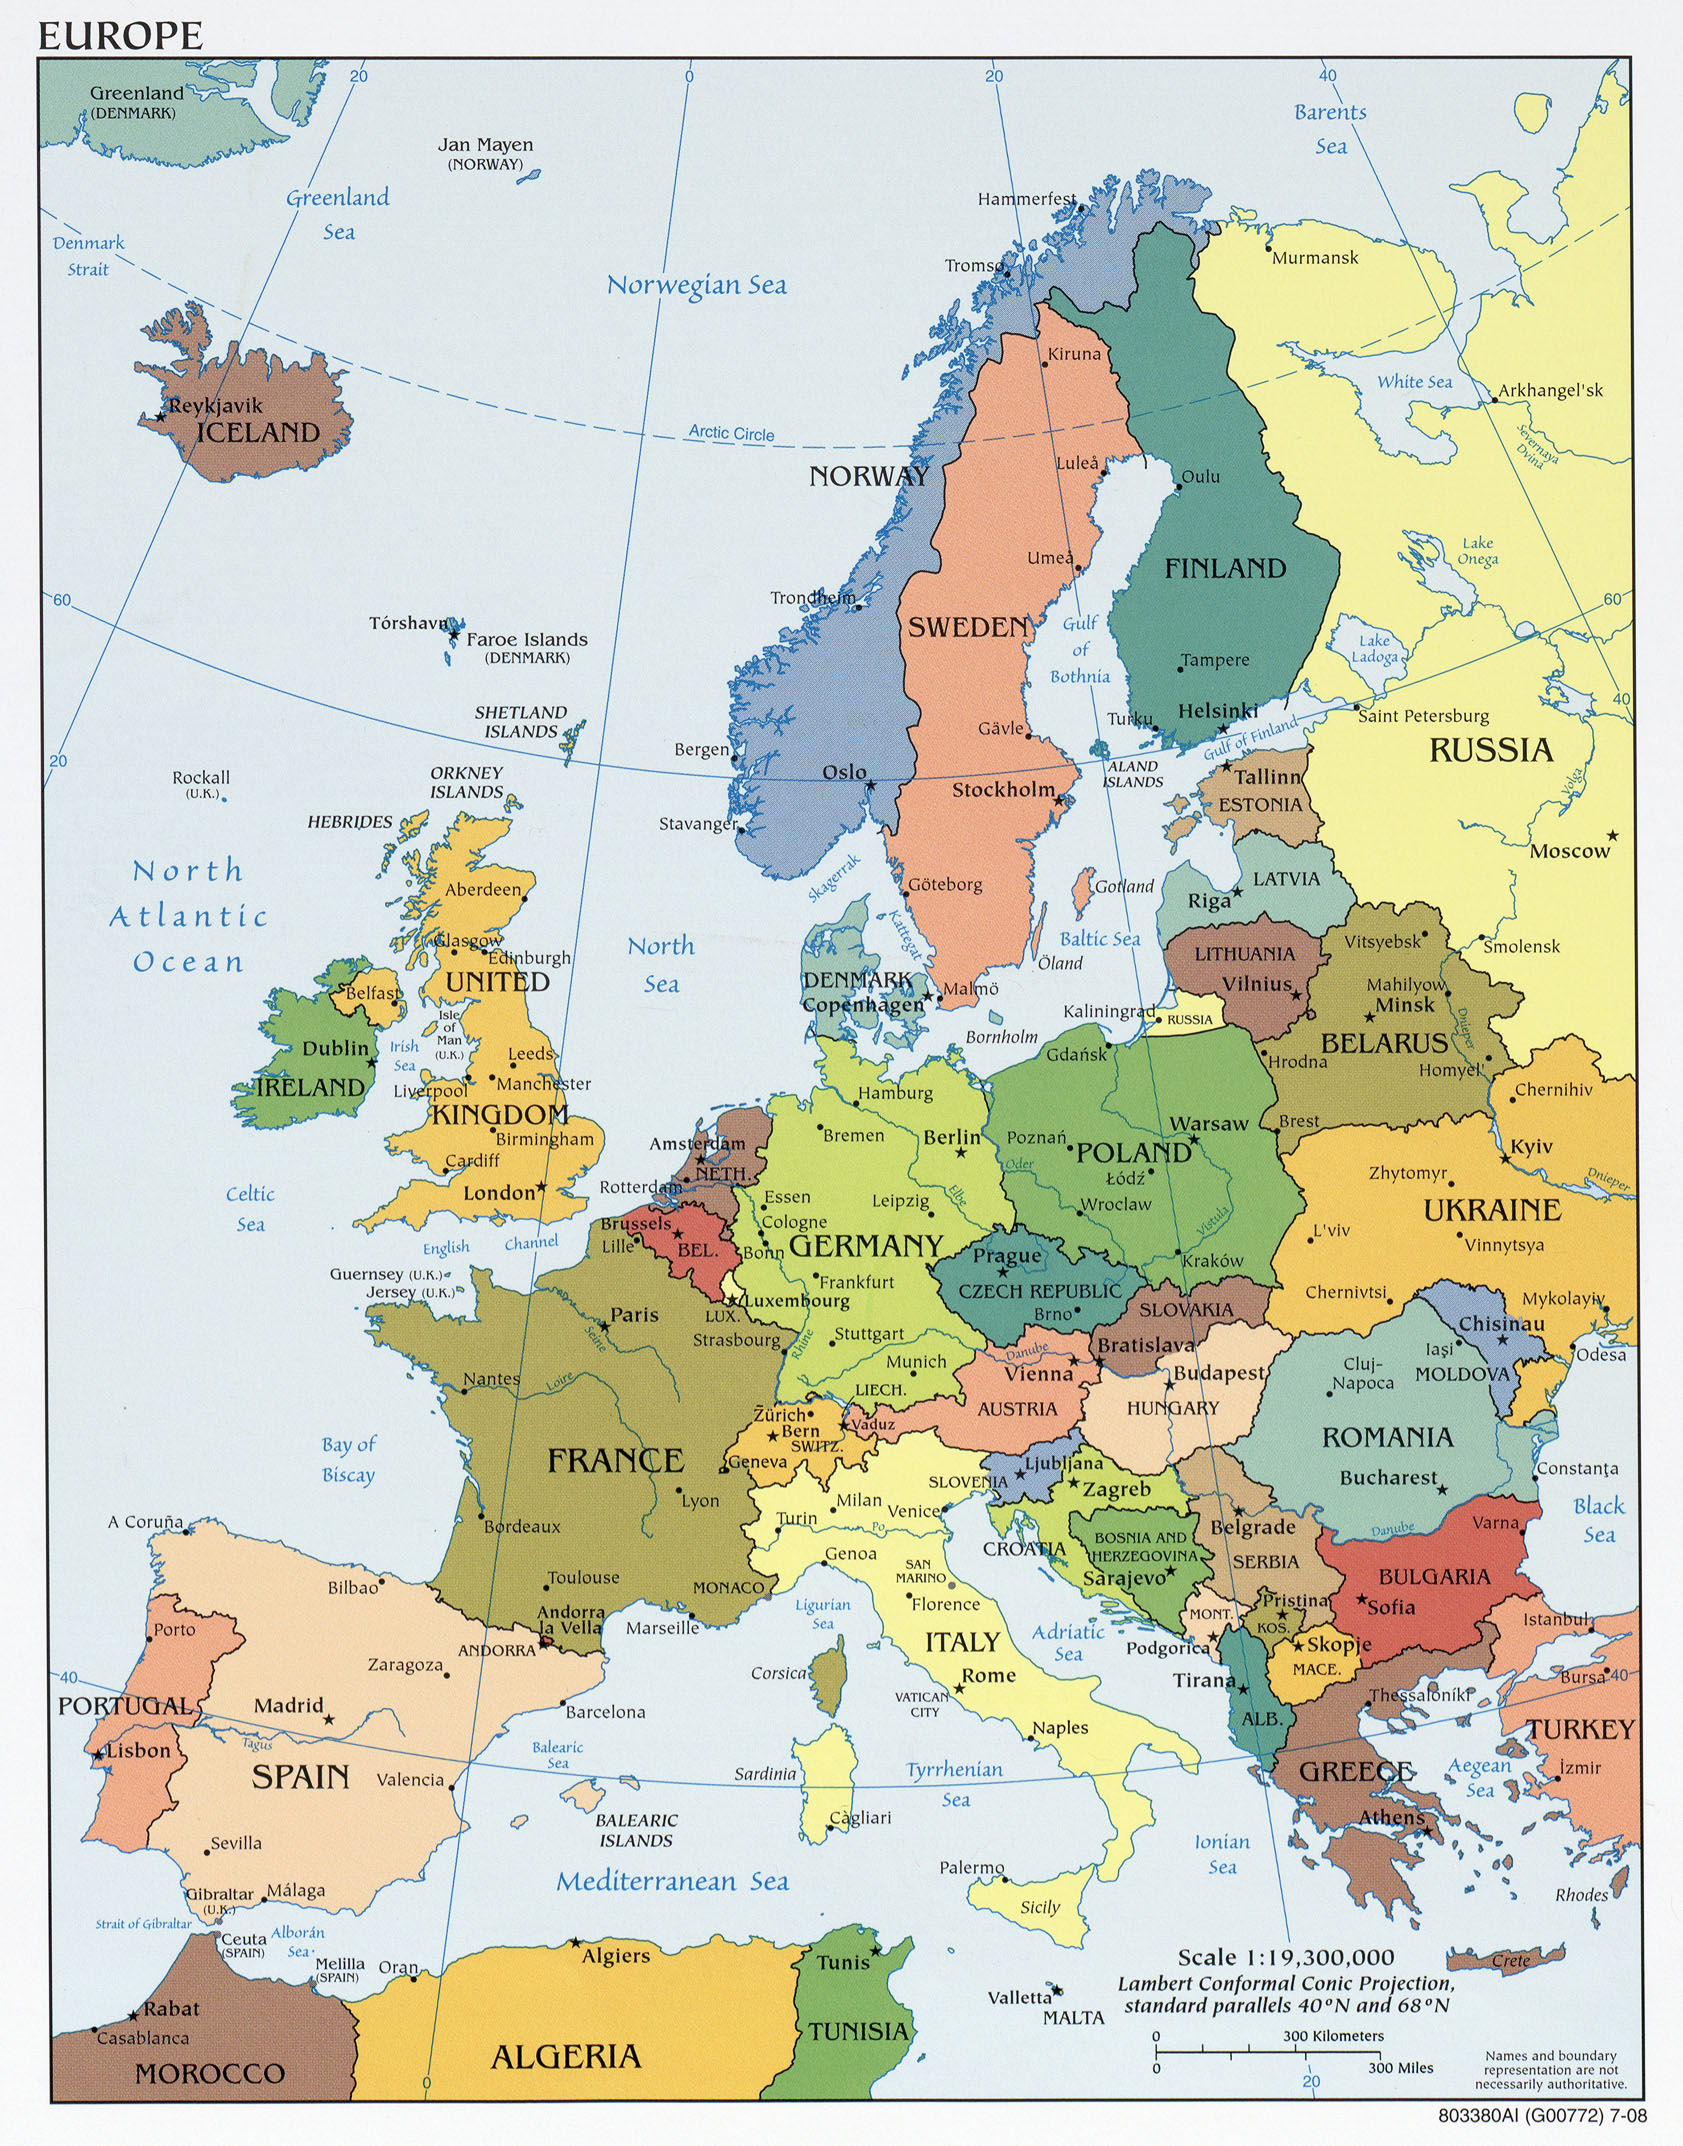 Political map of Europe (2008)